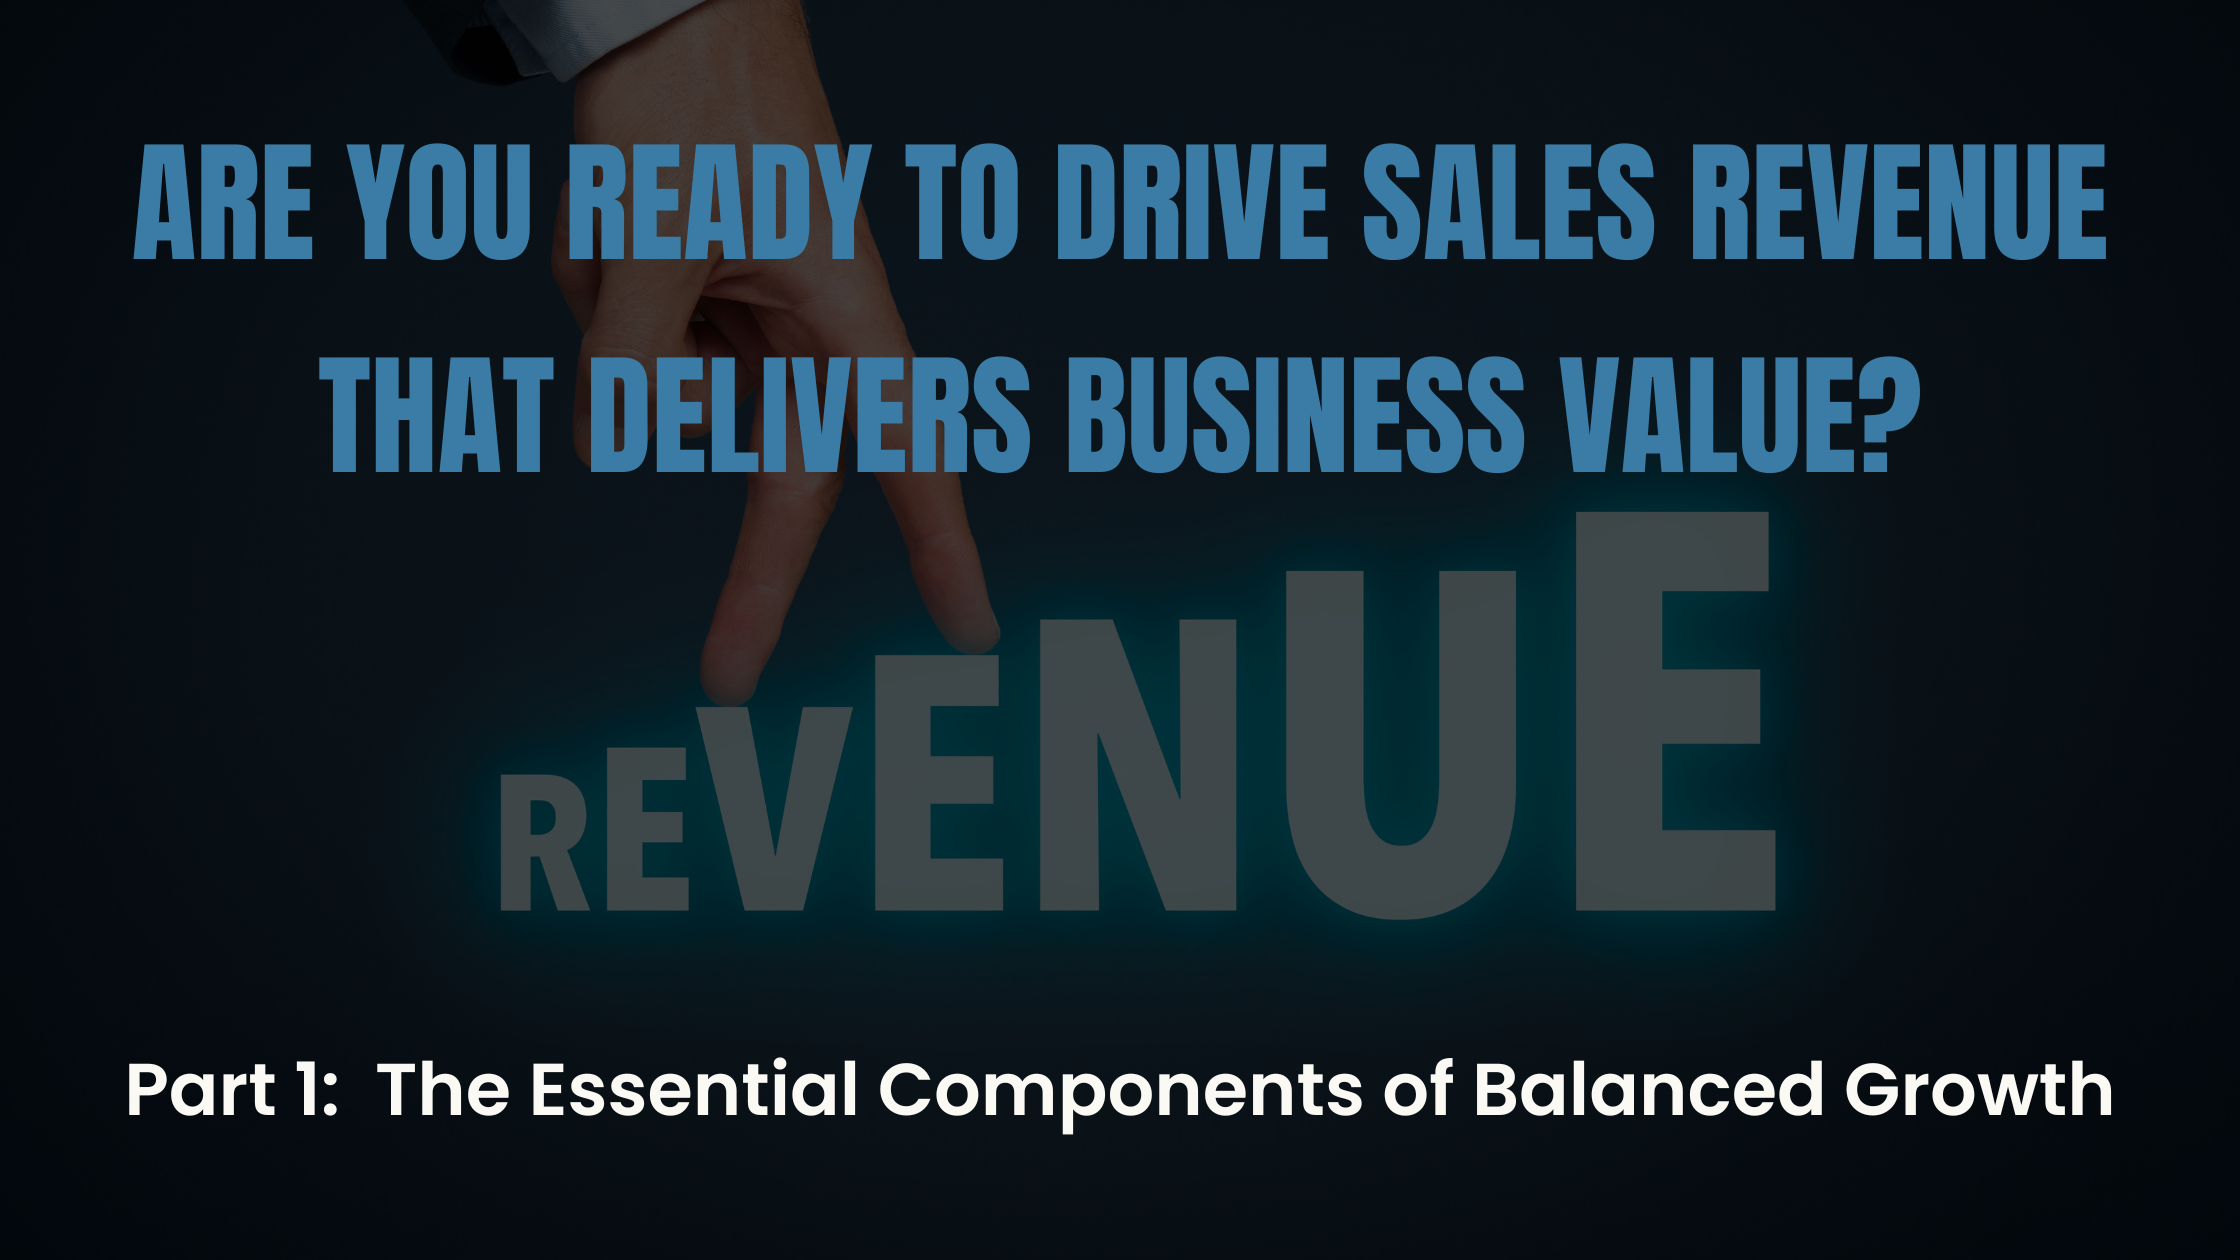 How to Drive Sales Revenue that Delivers Business Value - Part 1: The Essential Components of Balanced Growth | Rizolve Partners blog